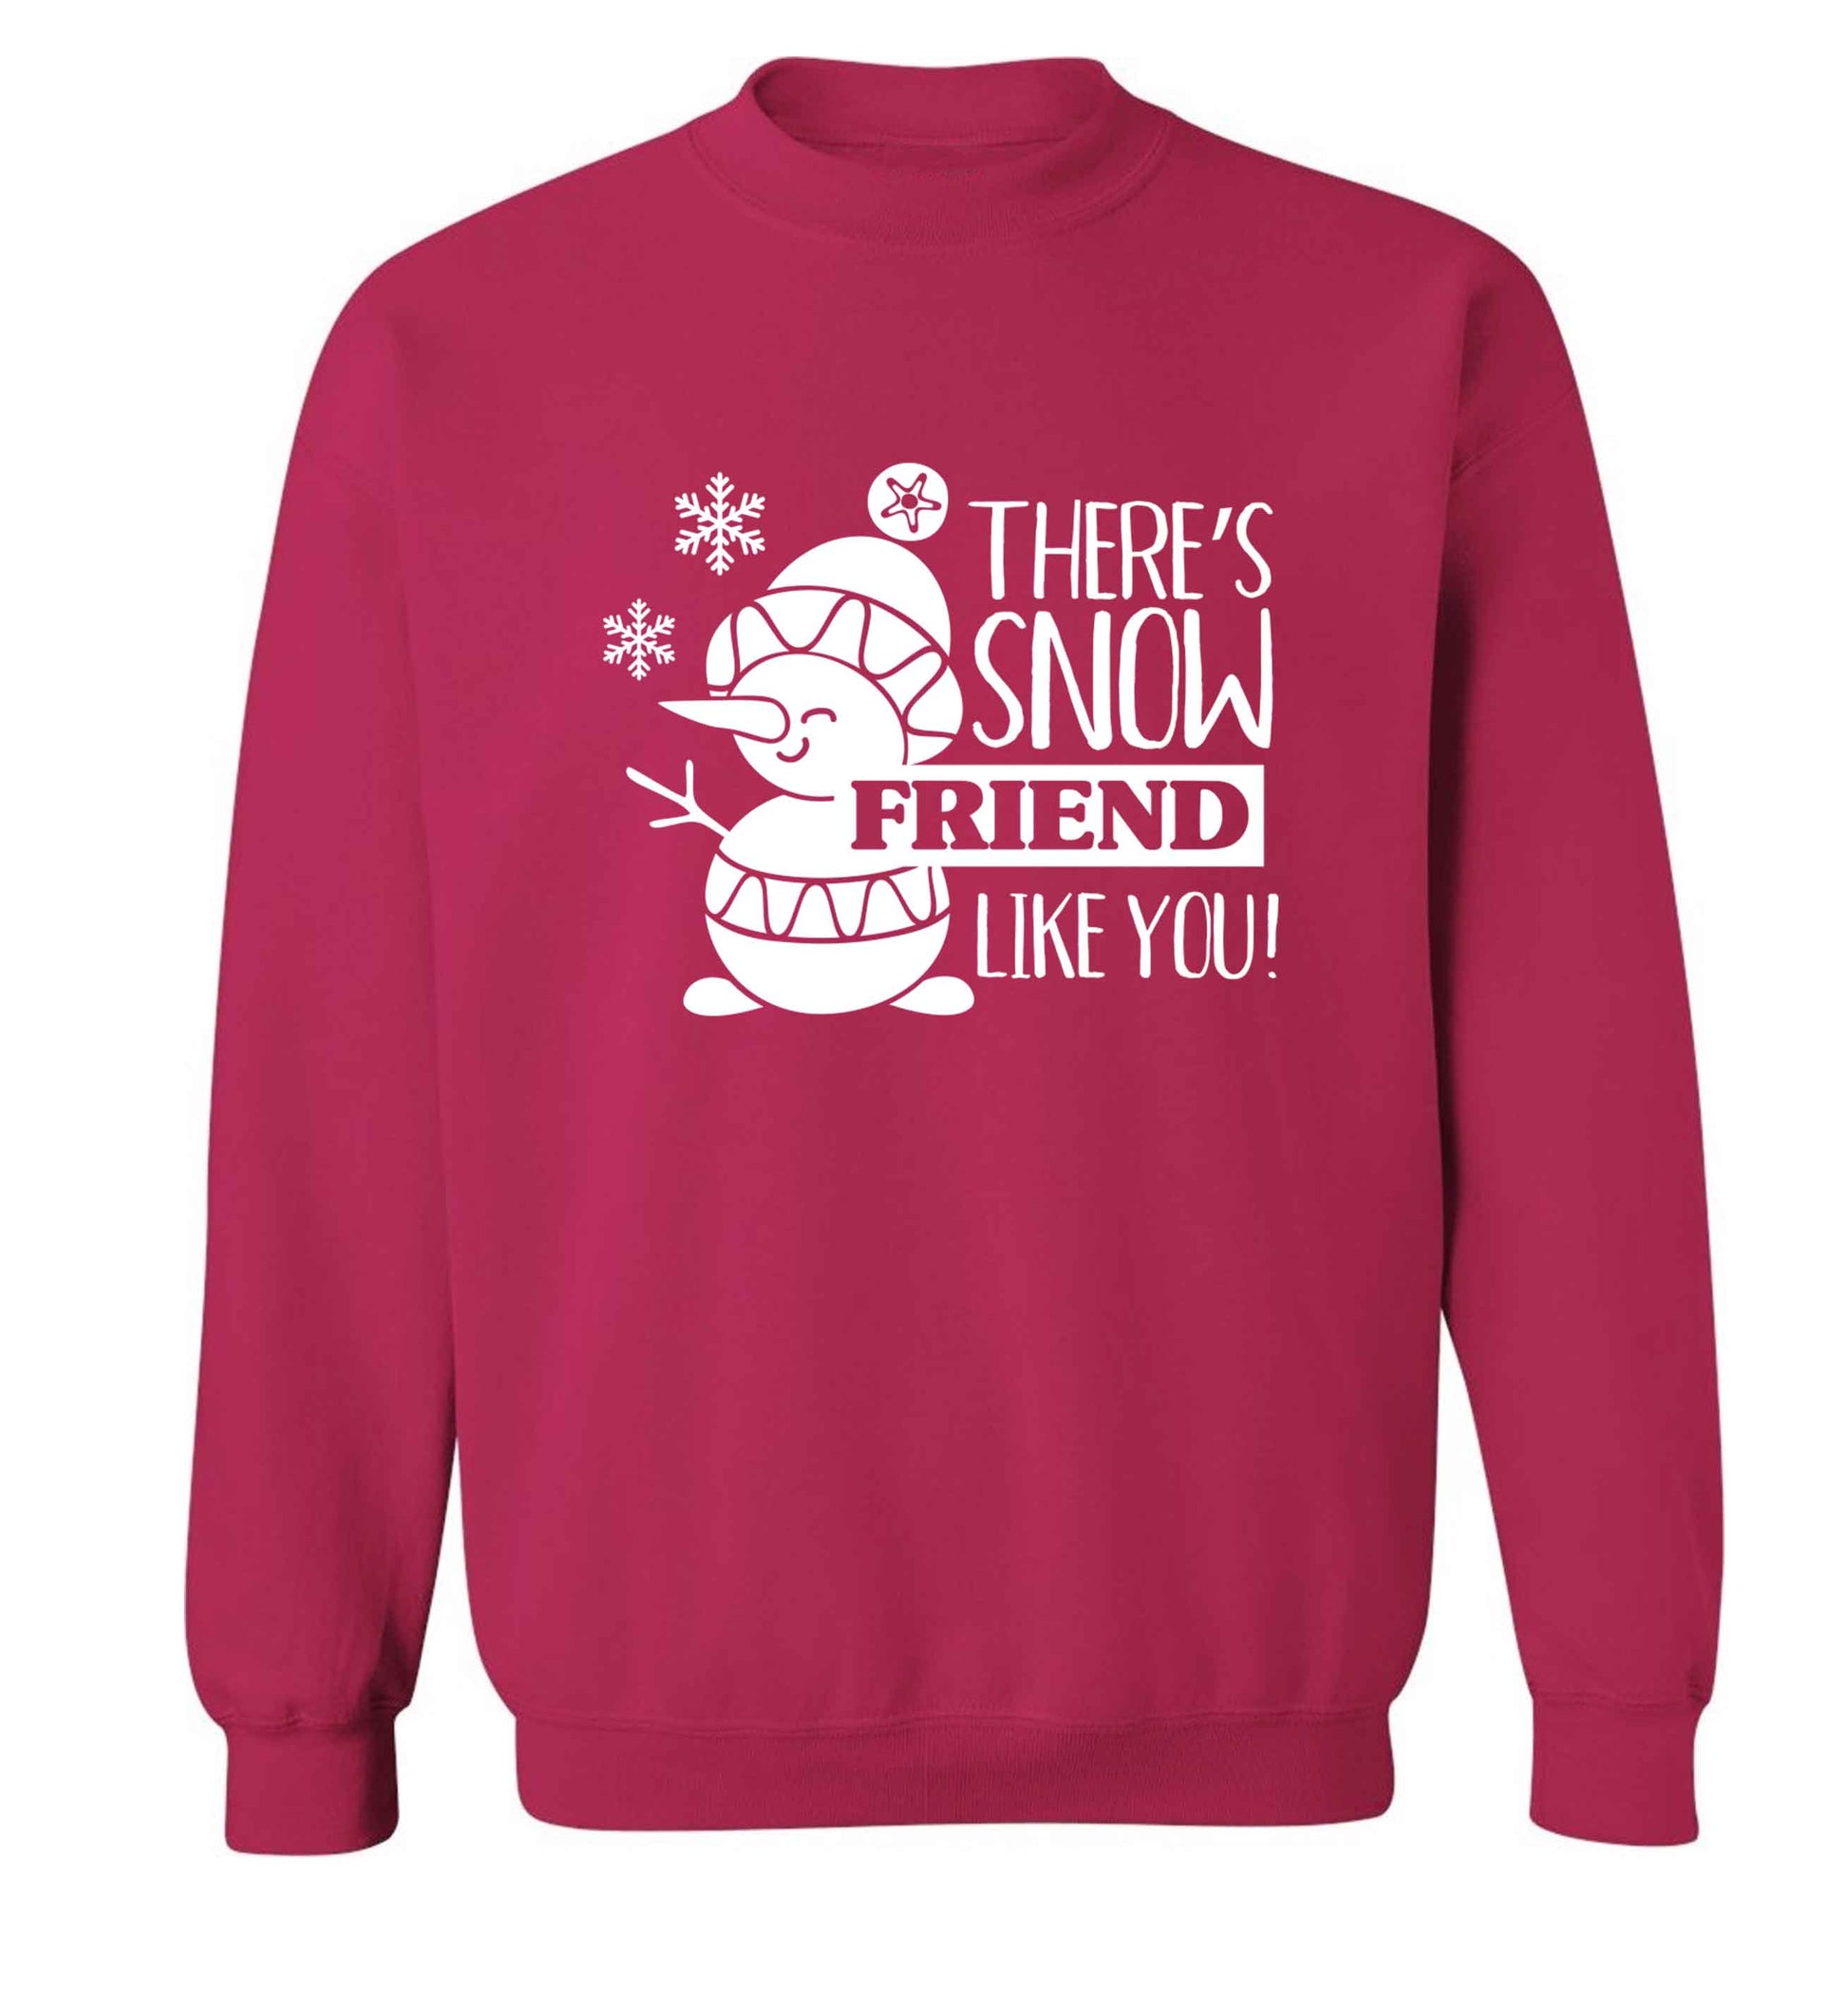 There's snow friend like you adult's unisex pink sweater 2XL